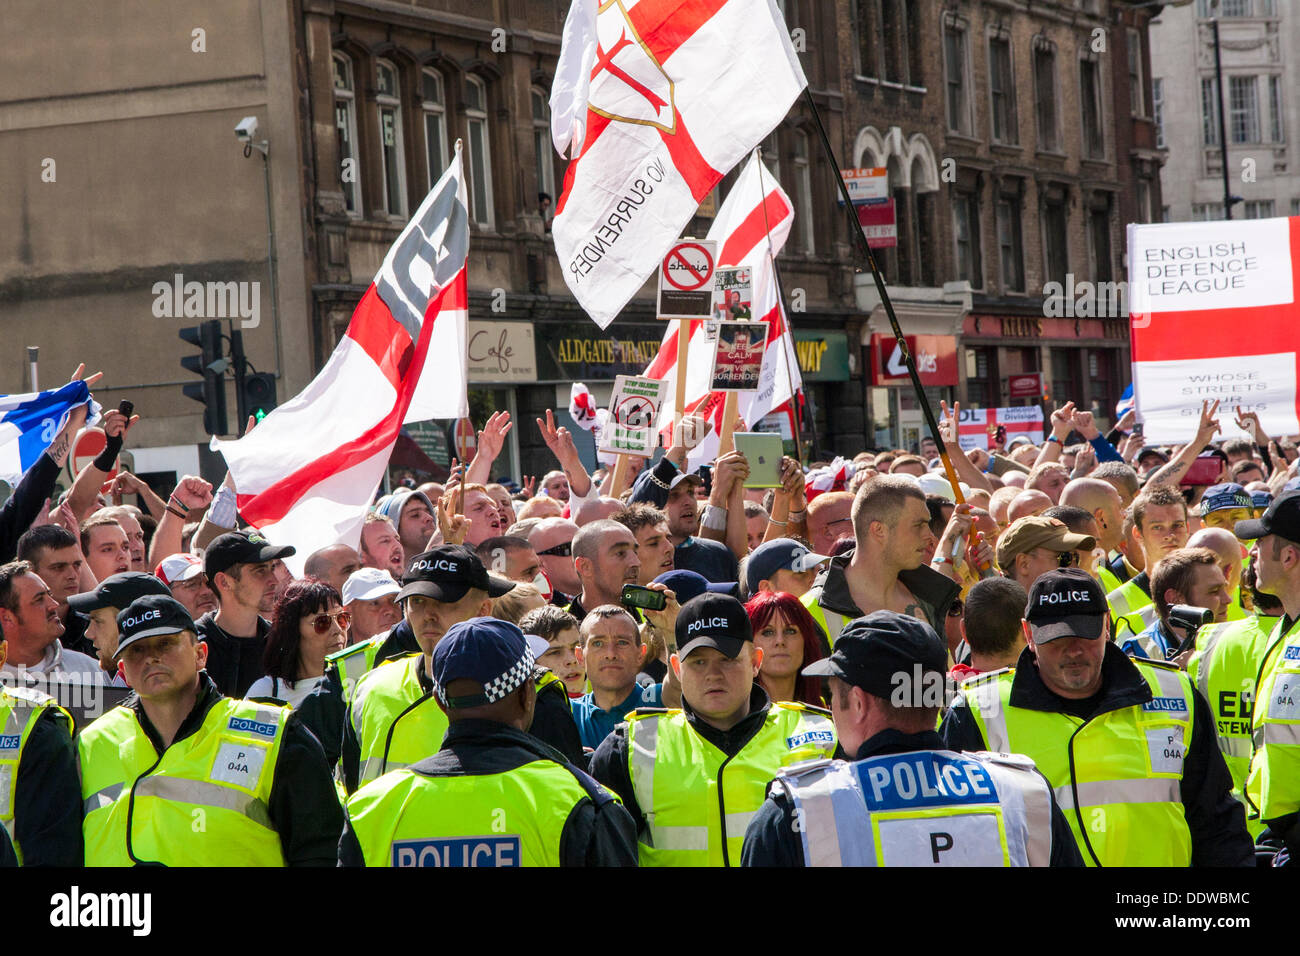 London, UK. 07th Sep, 2013. Several hundred English Defence League supporters arrive at a short rally outside Aldgate station on the edge of the borough of Tower Hamlets. Credit:  Paul Davey/Alamy Live News Stock Photo